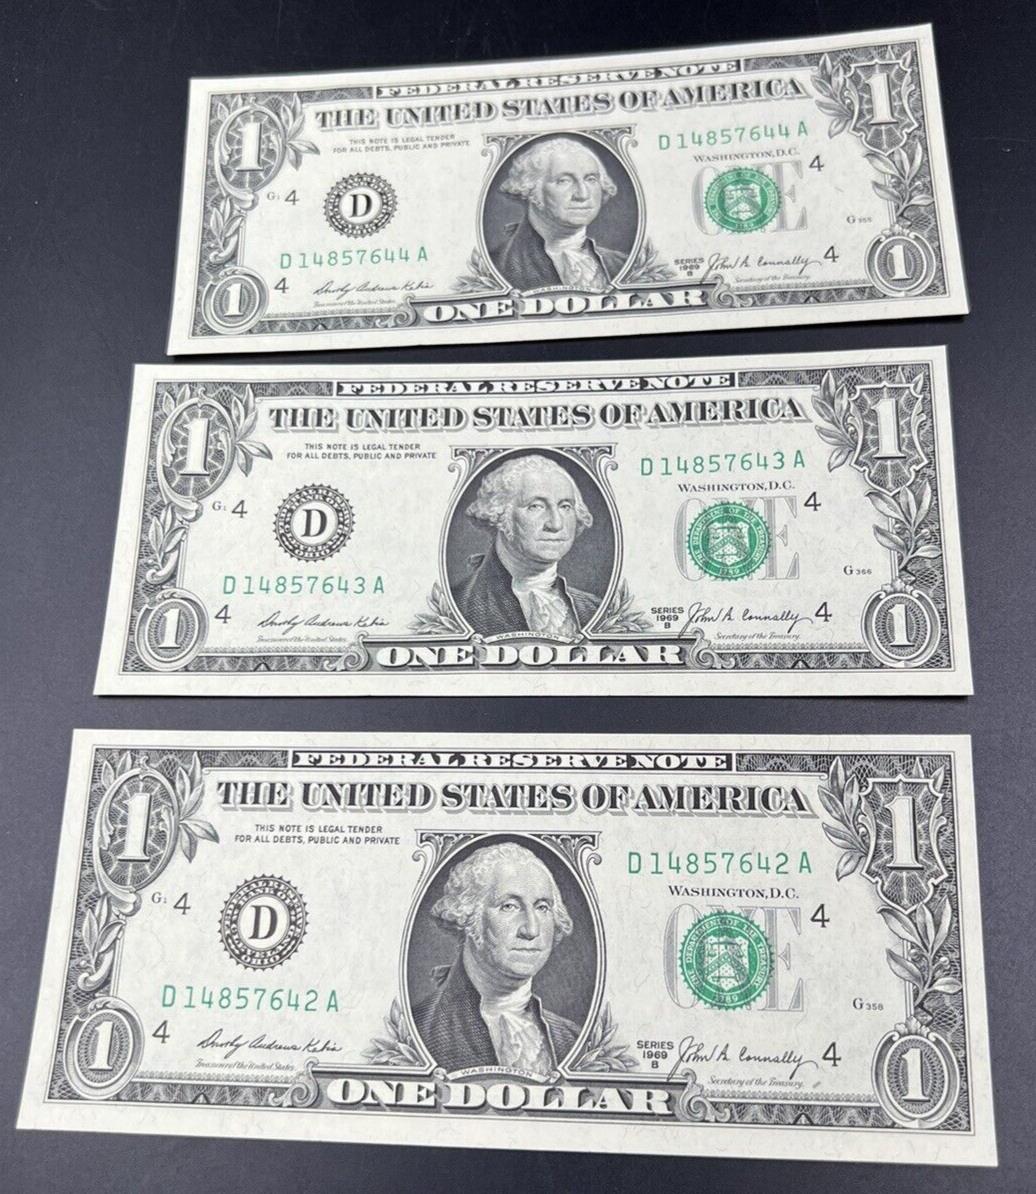 3 Consecutive Note Lot 1969 B $1 FRN Federal Reserve US Currency Bills CH UNC